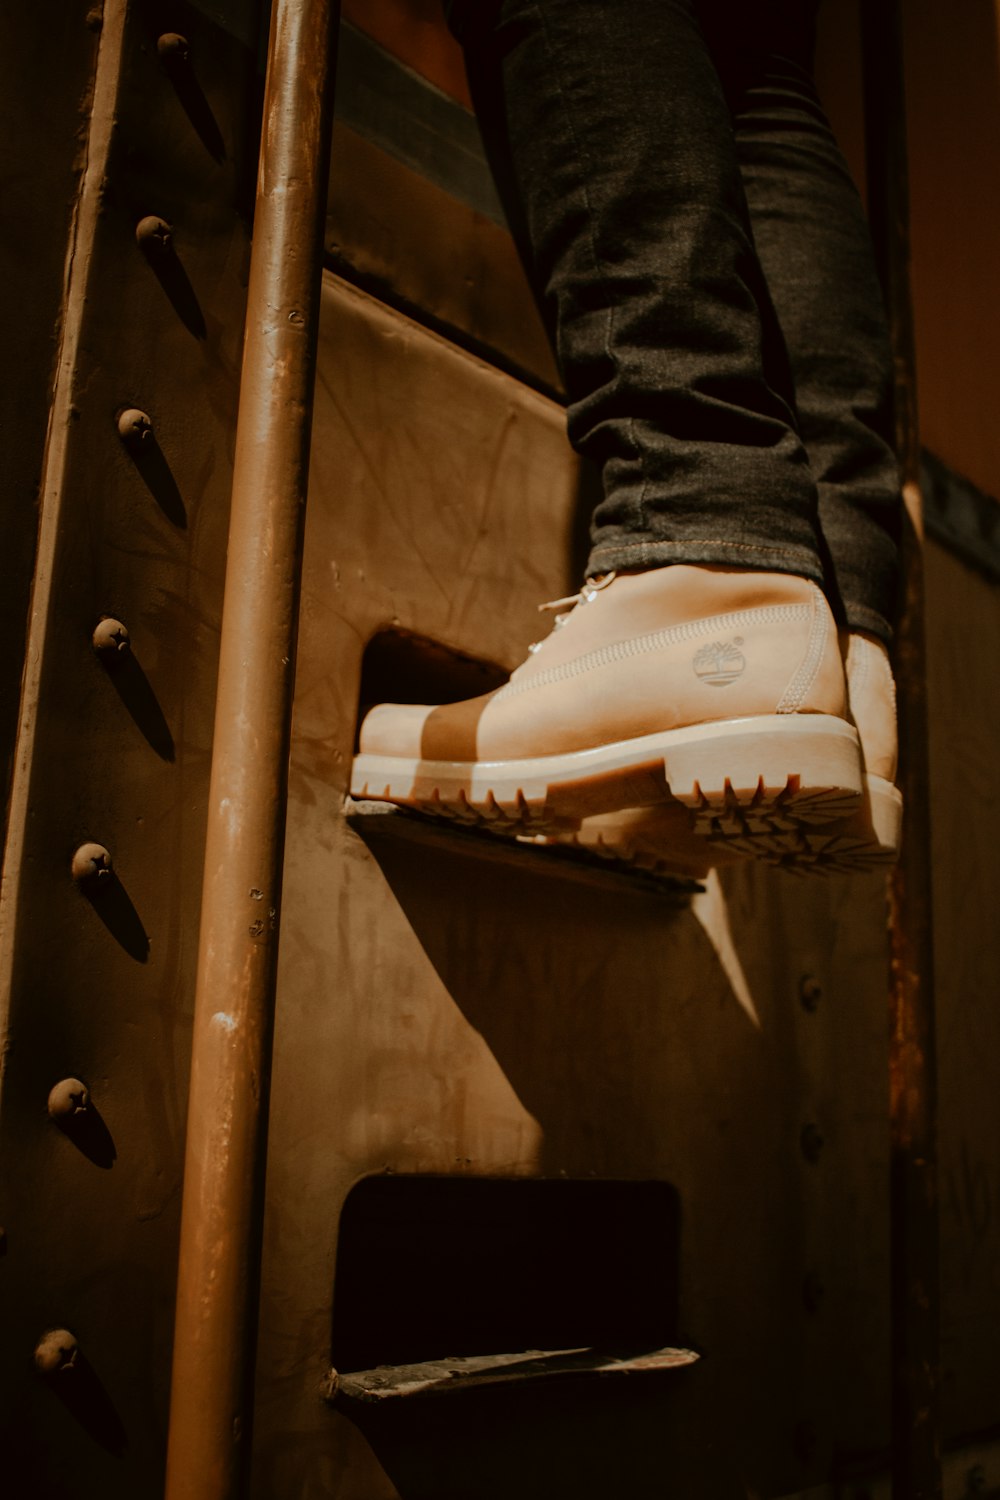 person wearing brown Timberland work boots climbing on stair